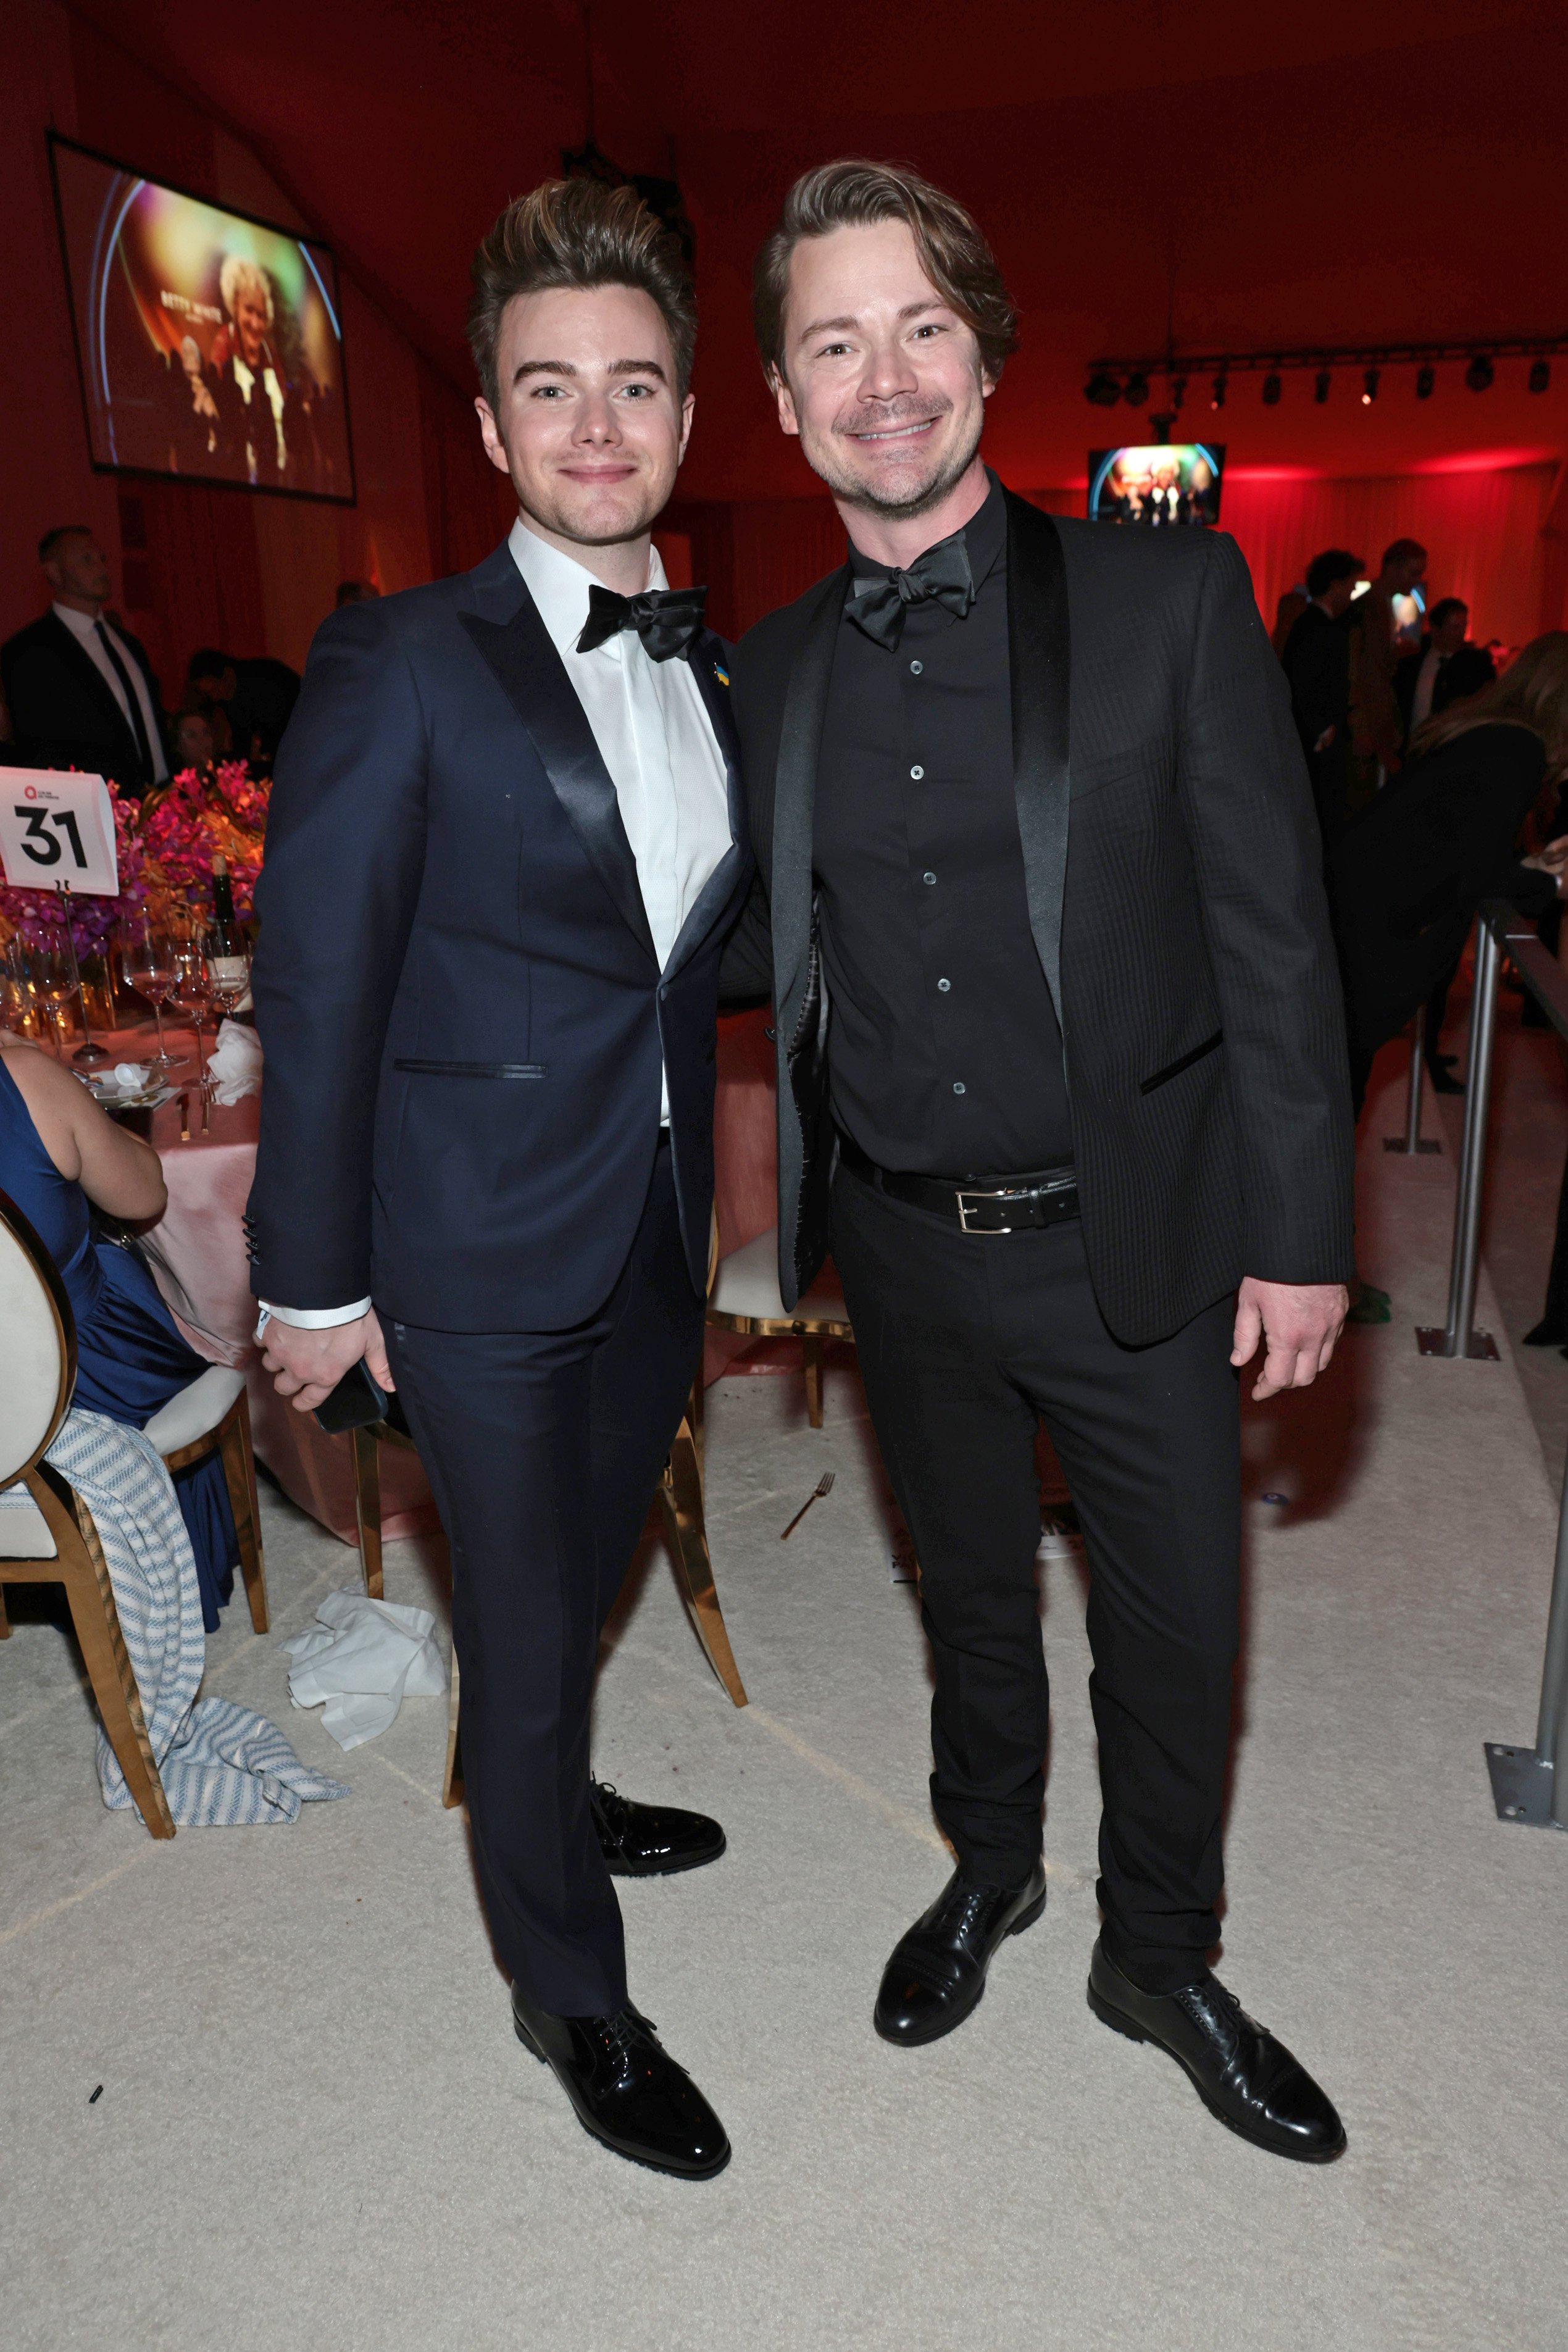 Chris Colfer and Will Sherrod at the Elton John AIDS Foundation's 30th Annual Academy Awards Viewing Party in West Hollywood, California on March 27, 2022 | Source: Getty Images